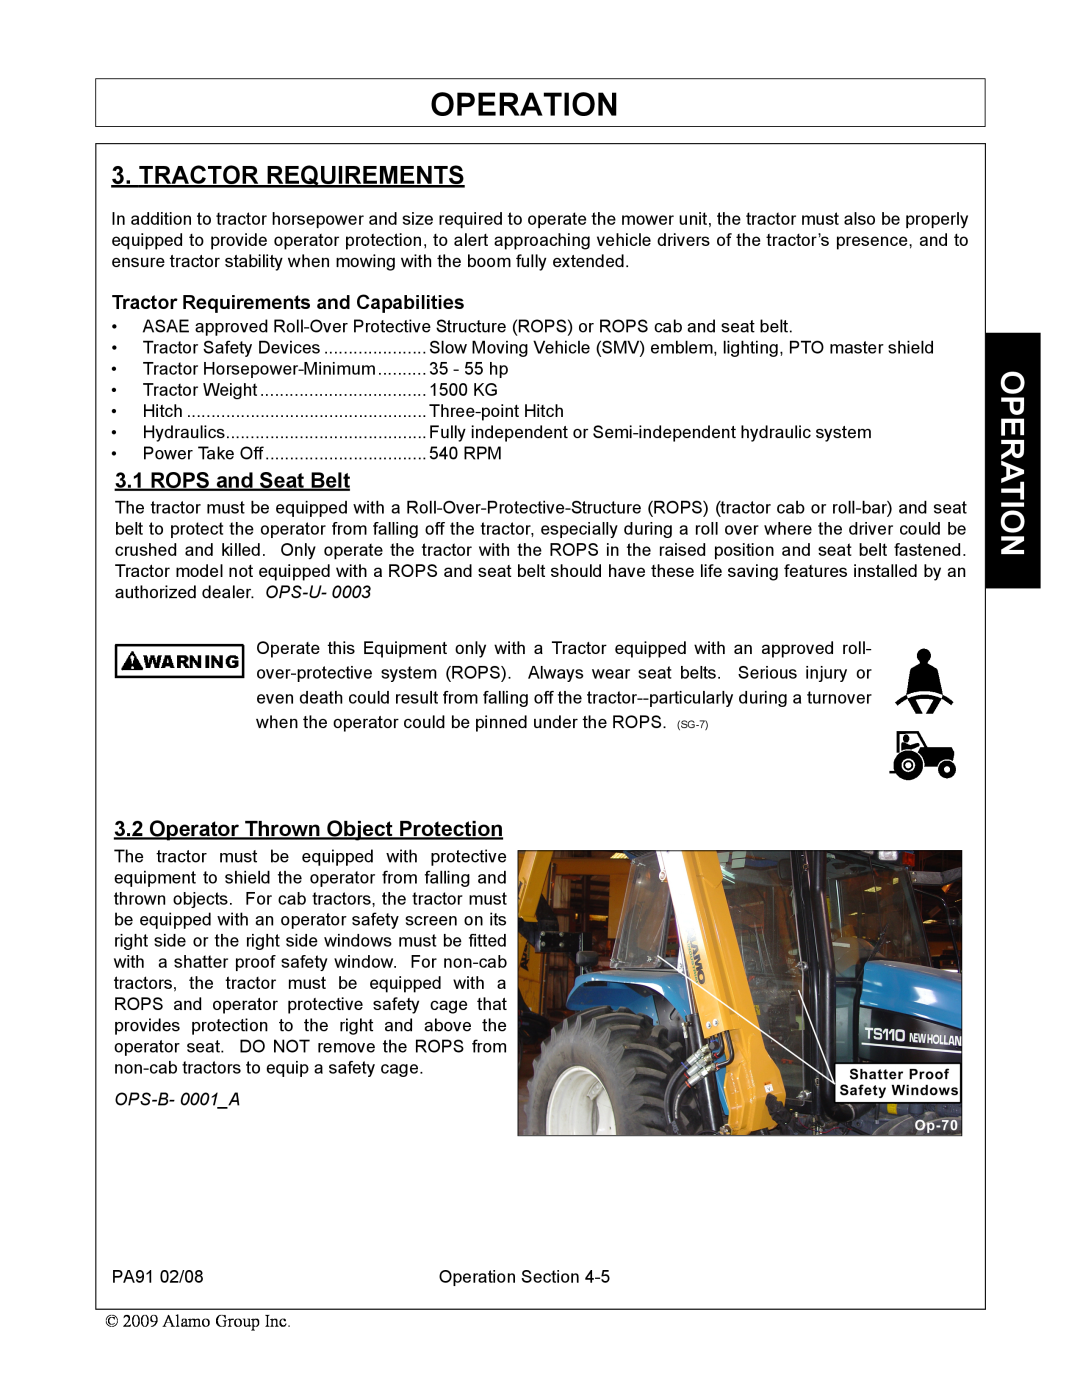 Alamo 7191852C manual Tractor Requirements, ROPS and Seat Belt, Operator Thrown Object Protection, Operation, OPS-B-0001_A 